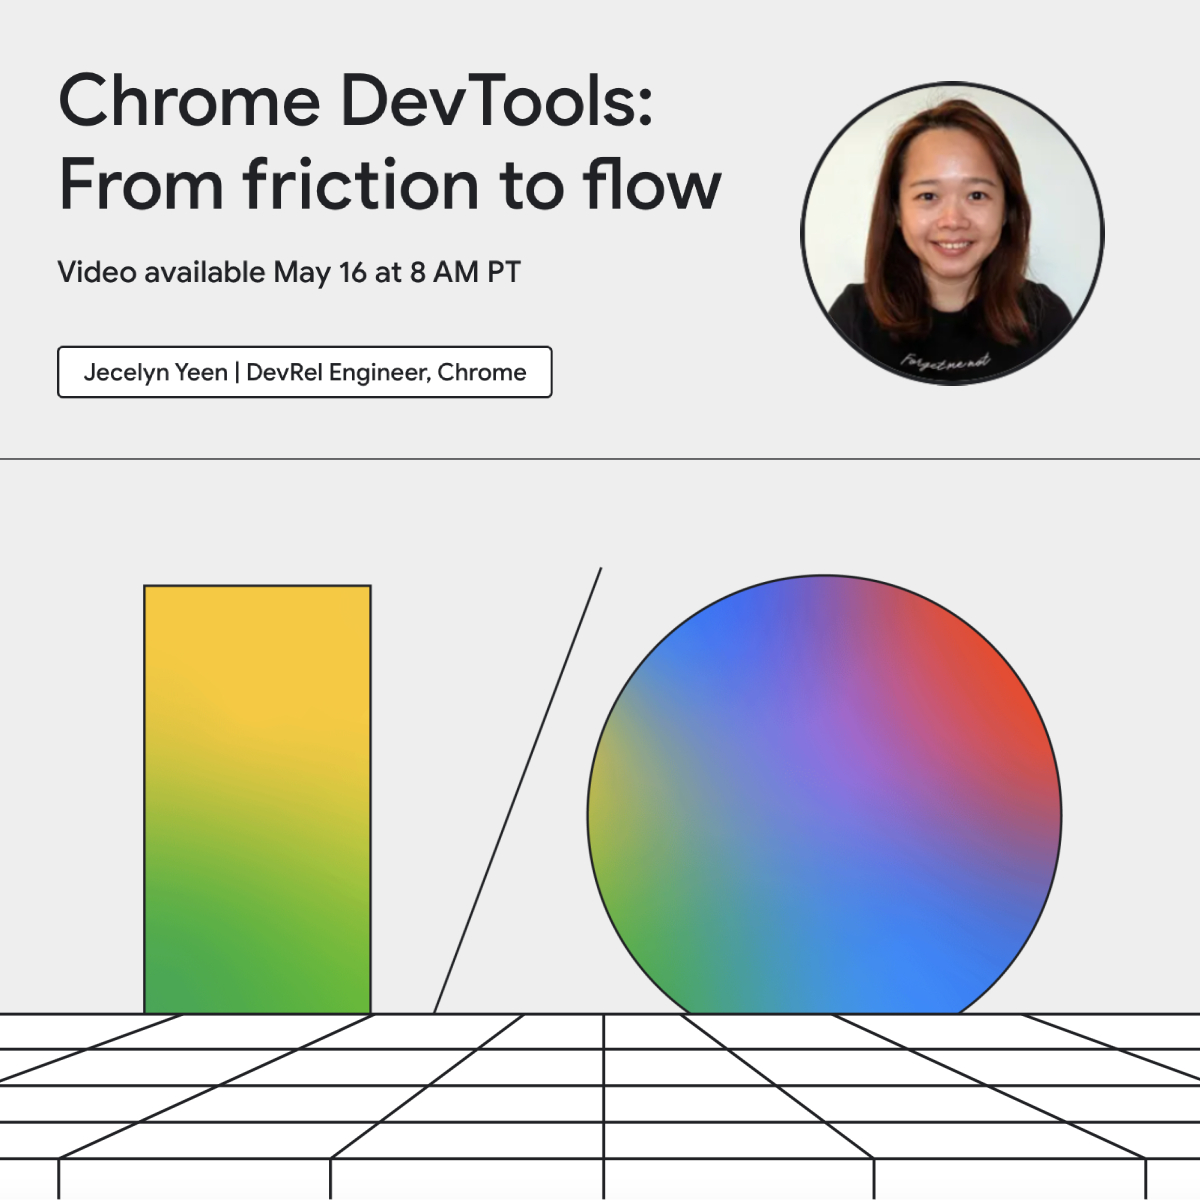 Who is going to I/O at May 14? See you there! 😍 Also, stay tuned for my online talk 'Chrome DevTools: From friction to flow'. 🥳 Can't wait to share our latest works with you. See you all in-person & online! #ChromeDevTools